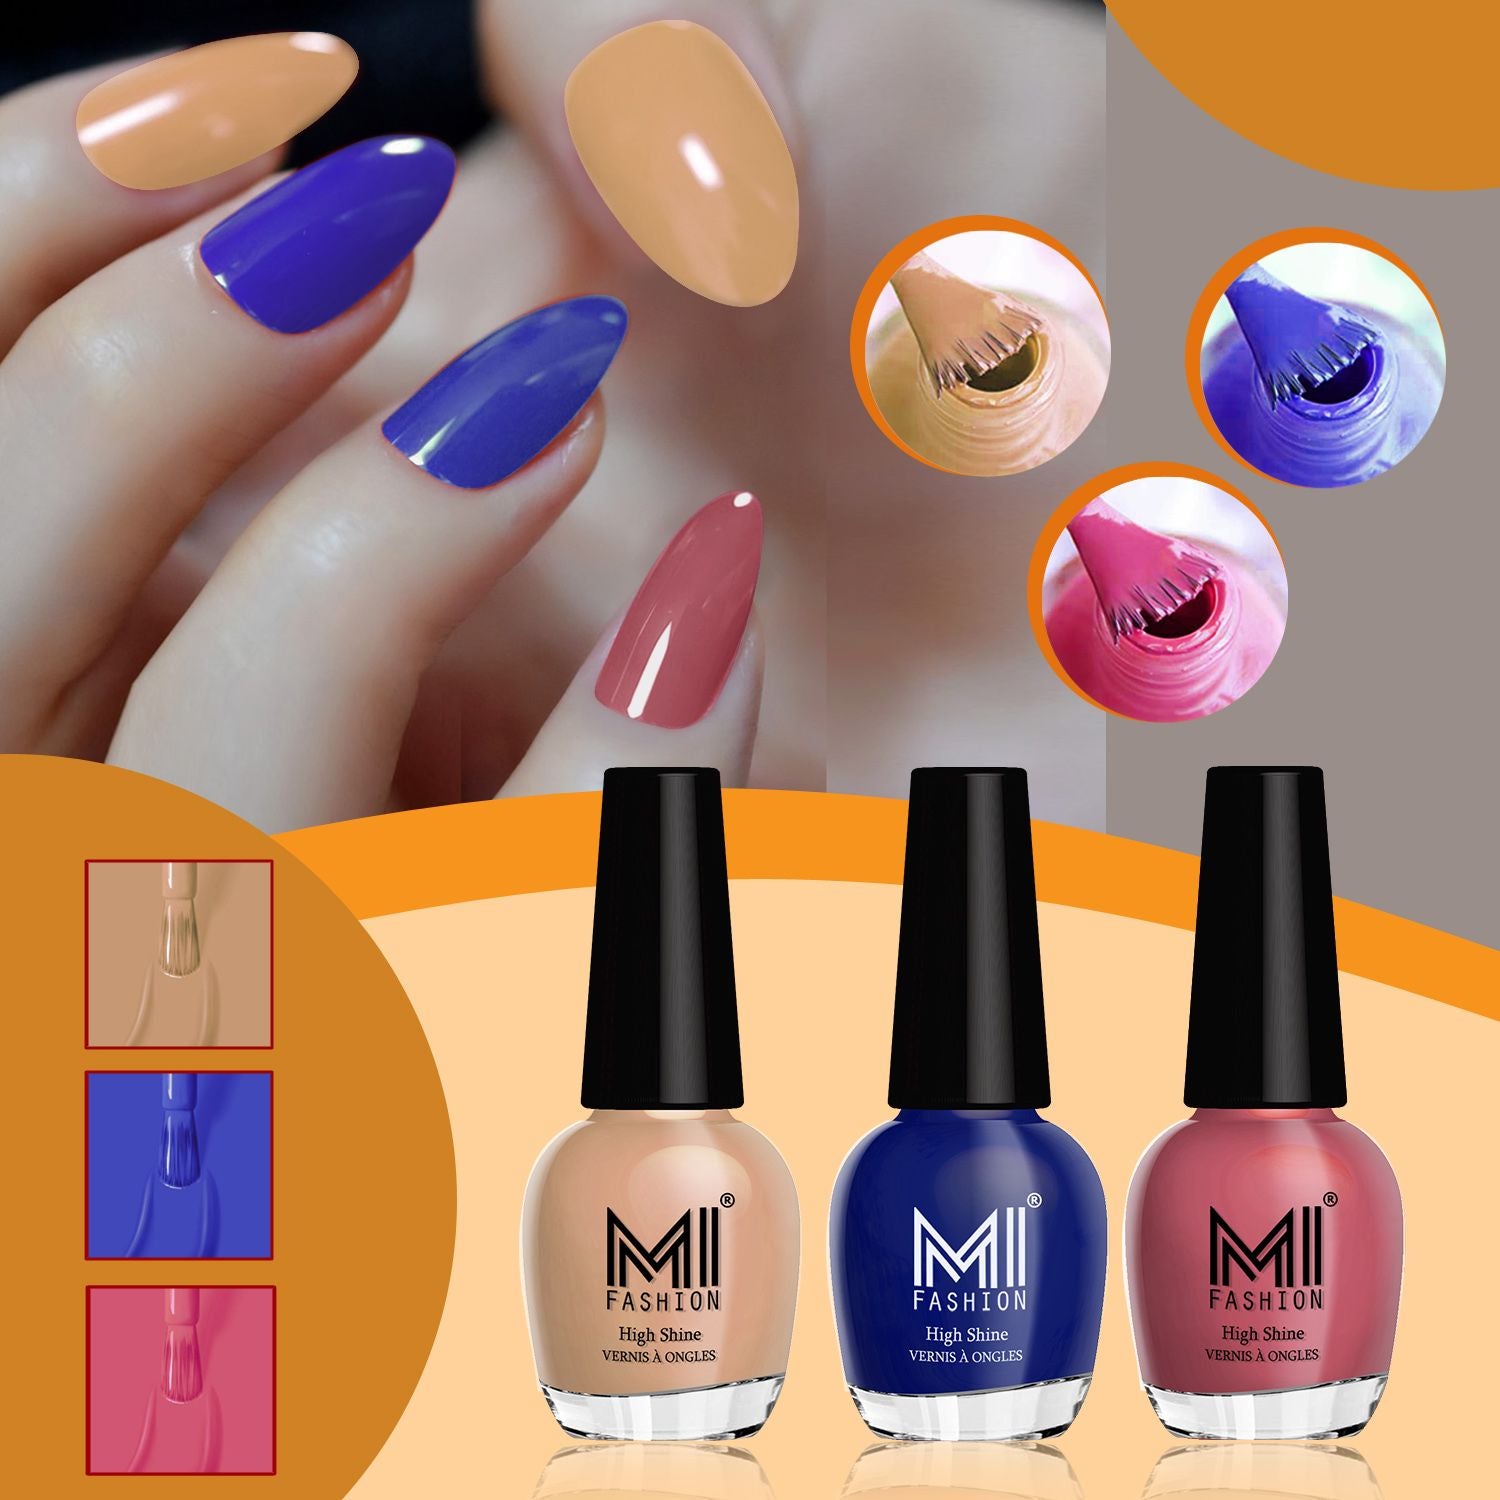 8 Nail Paint Shades You Must Promptly Try For September!